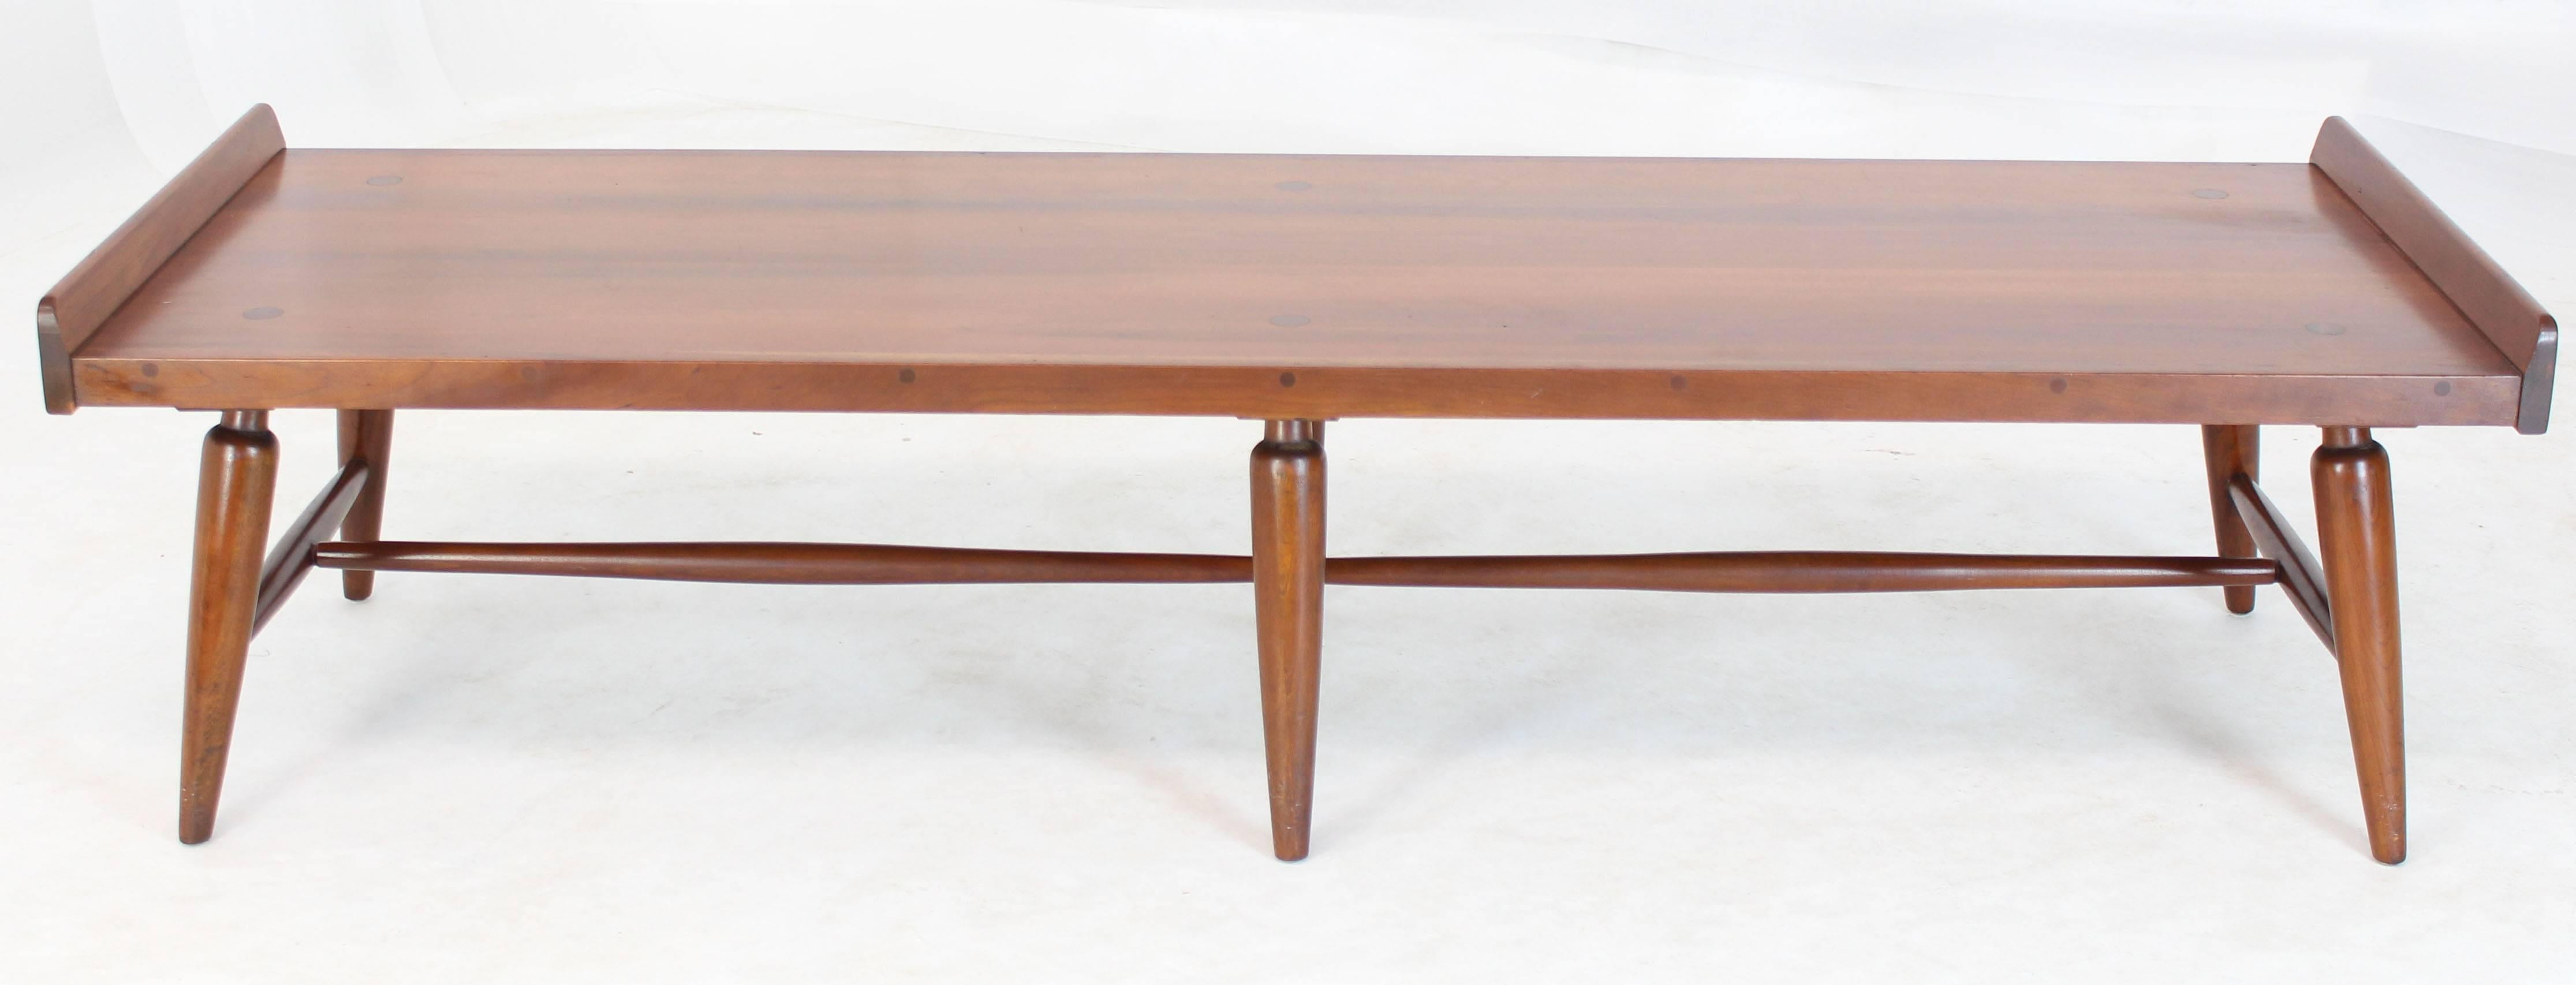 Mid-Century Modern Solid Maple Six Legges Bench or Coffee Table with rolled edges